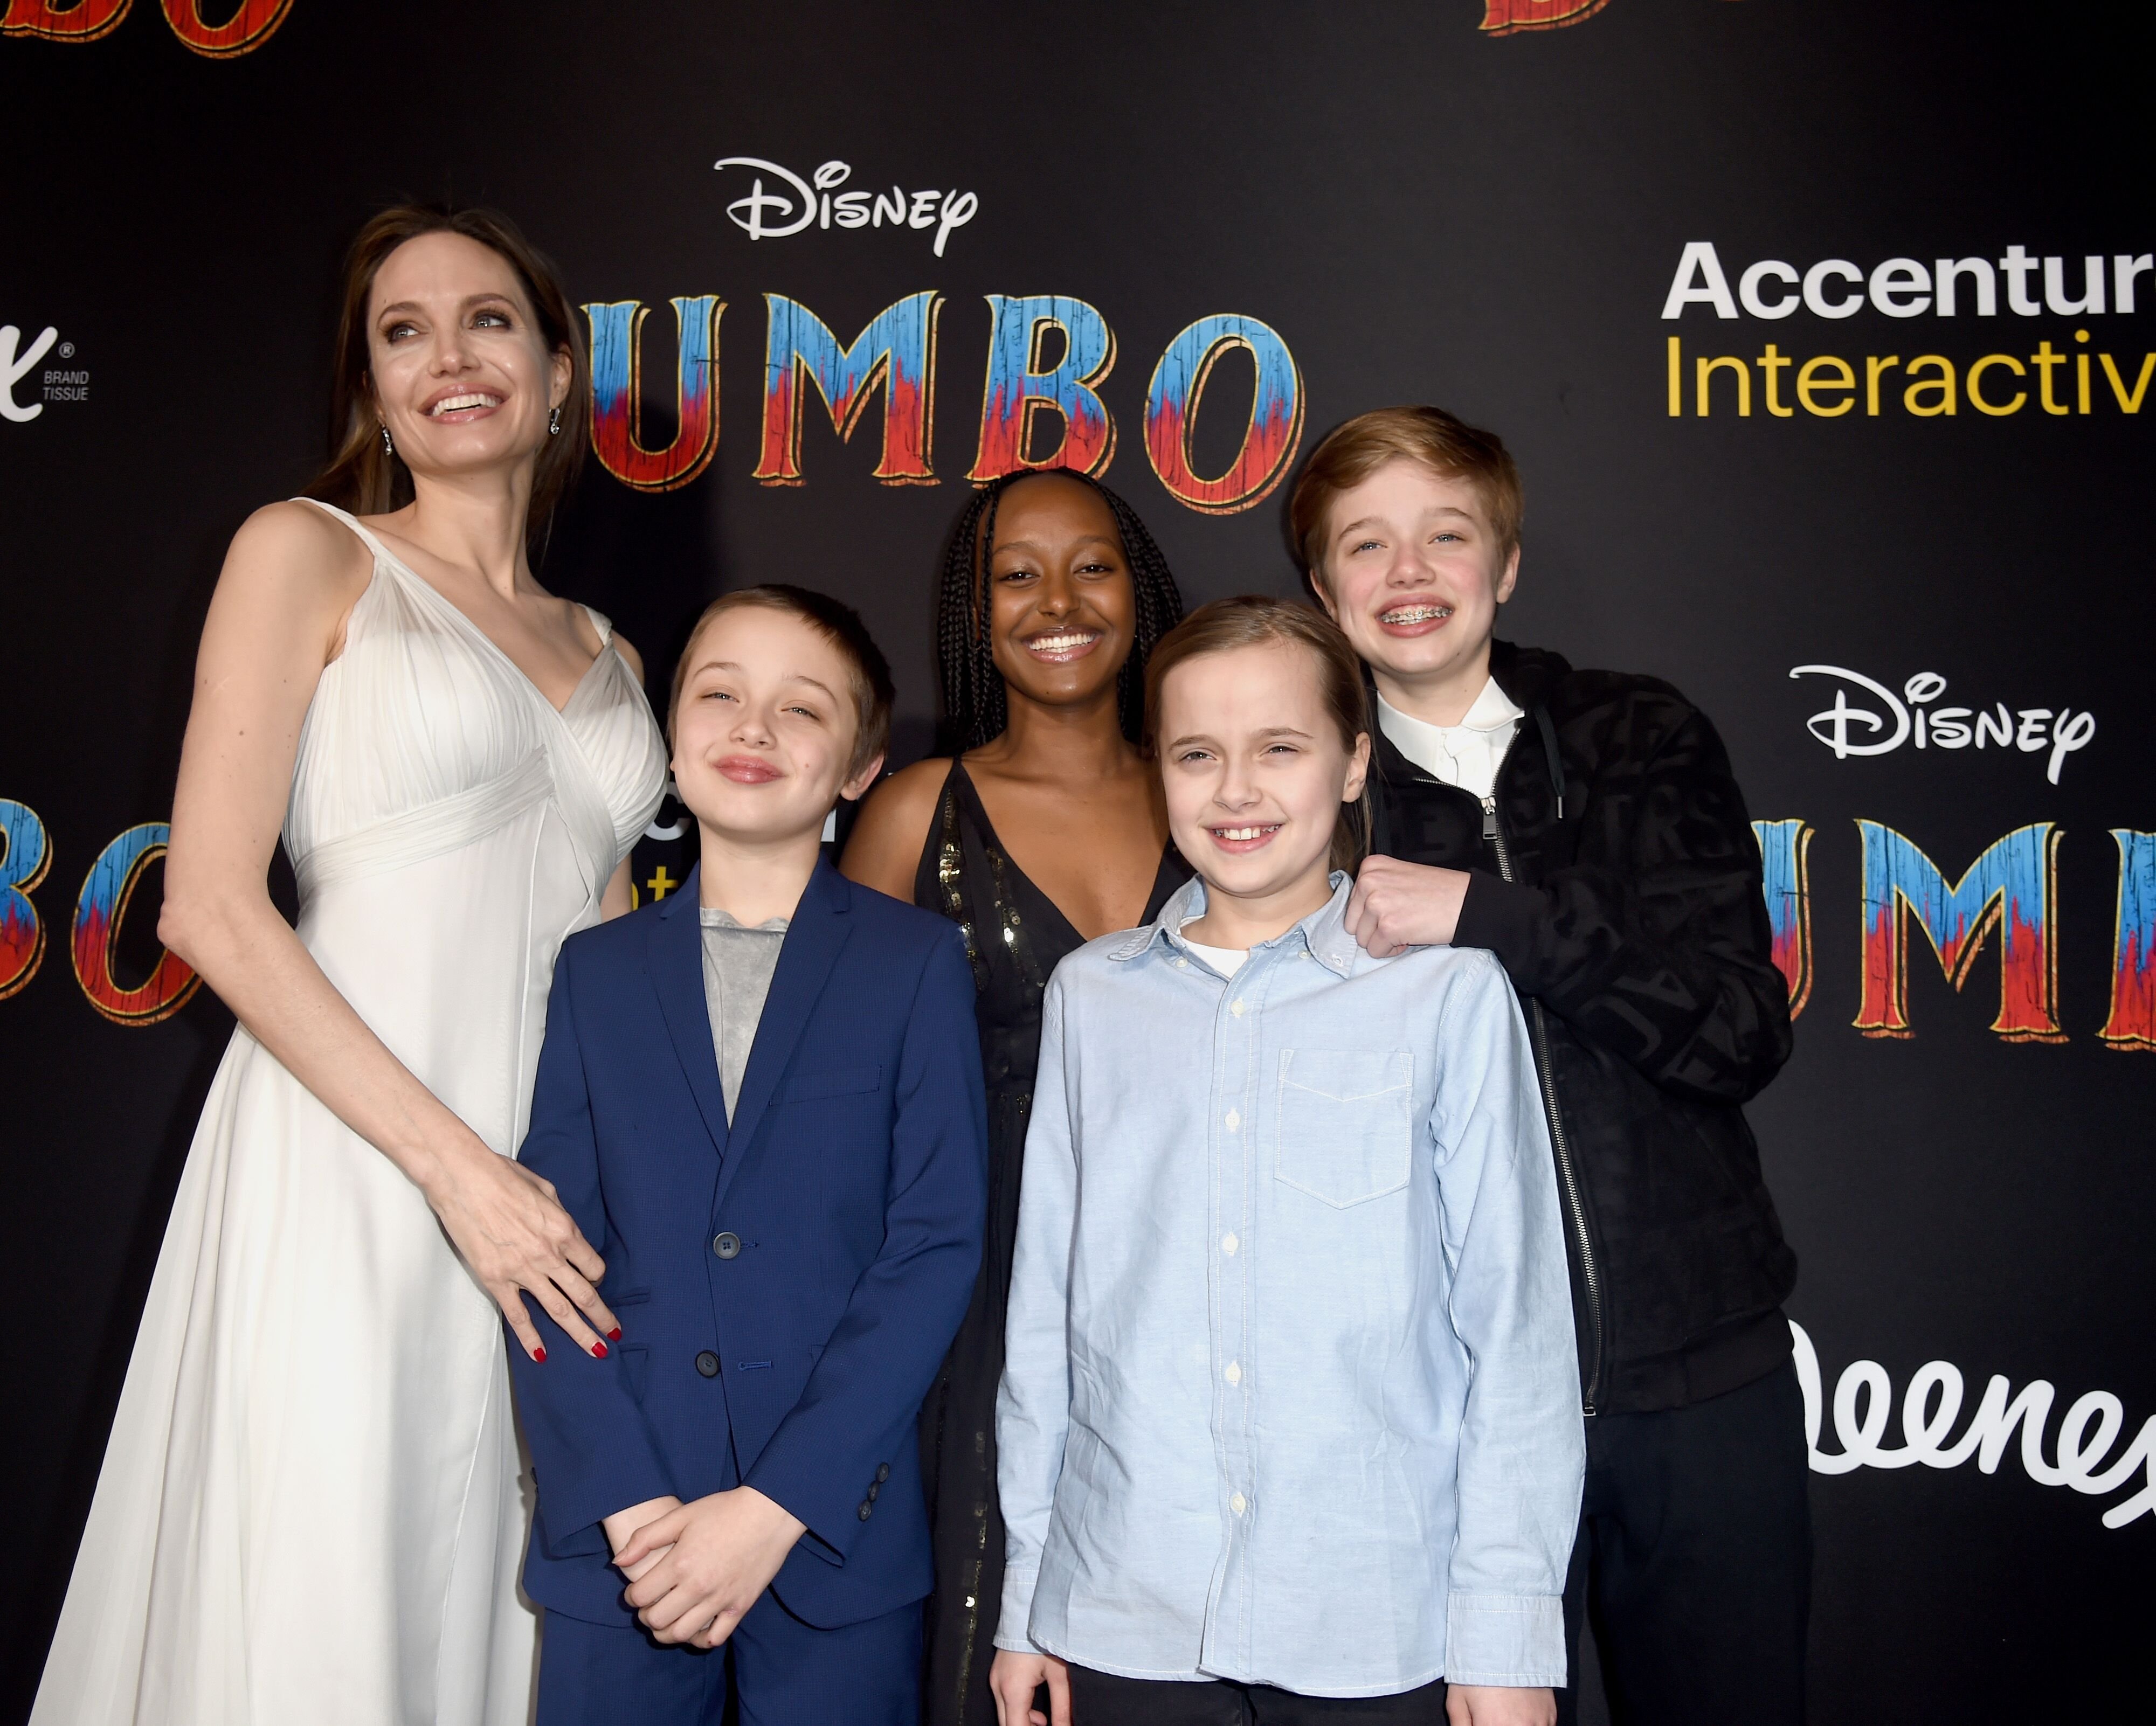 Angelina Jolie, Knox Leon Jolie-Pitt, Zahara Marley Jolie-Pitt, Vivienne Marcheline Jolie-Pitt, and Shiloh Nouvel Jolie-Pitt attend the premiere of Disney's "Dumbo" at El Capitan Theatre on March 11, 2019 in Los Angeles, California. | Source: Getty Images